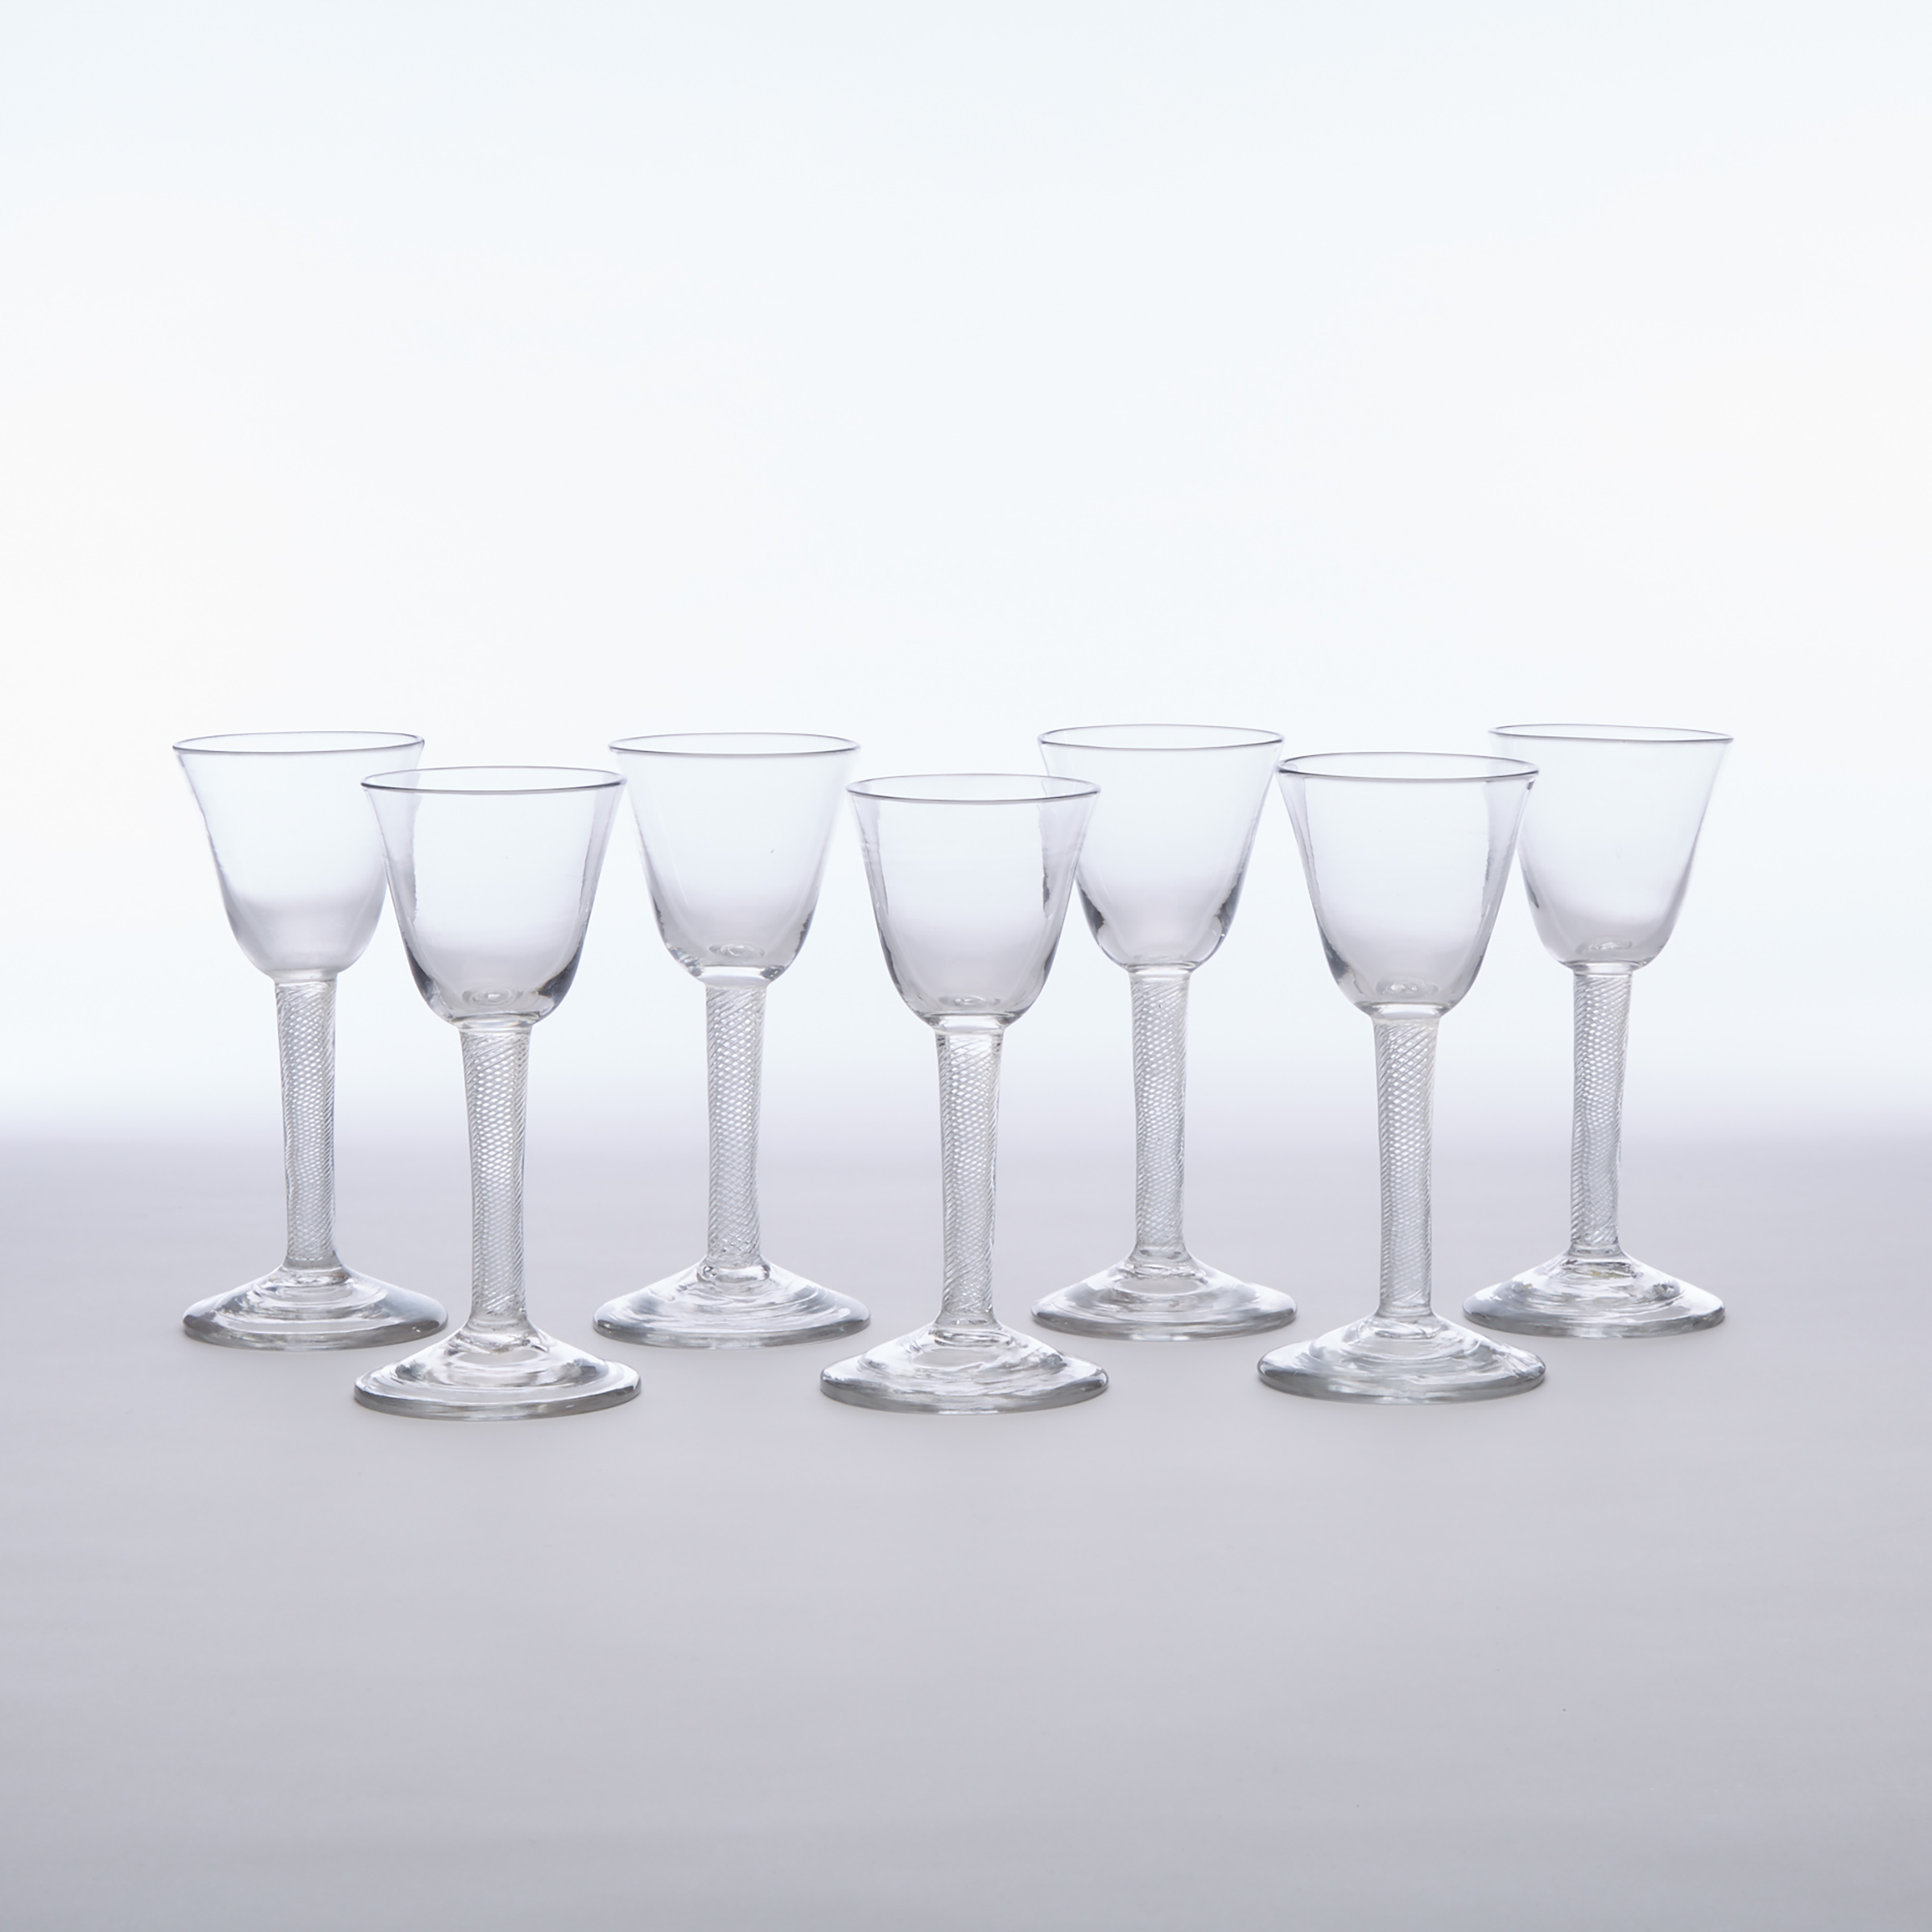 Set of Seven English Air Twist Stemmed Large Wine Glasses, mid-18th century